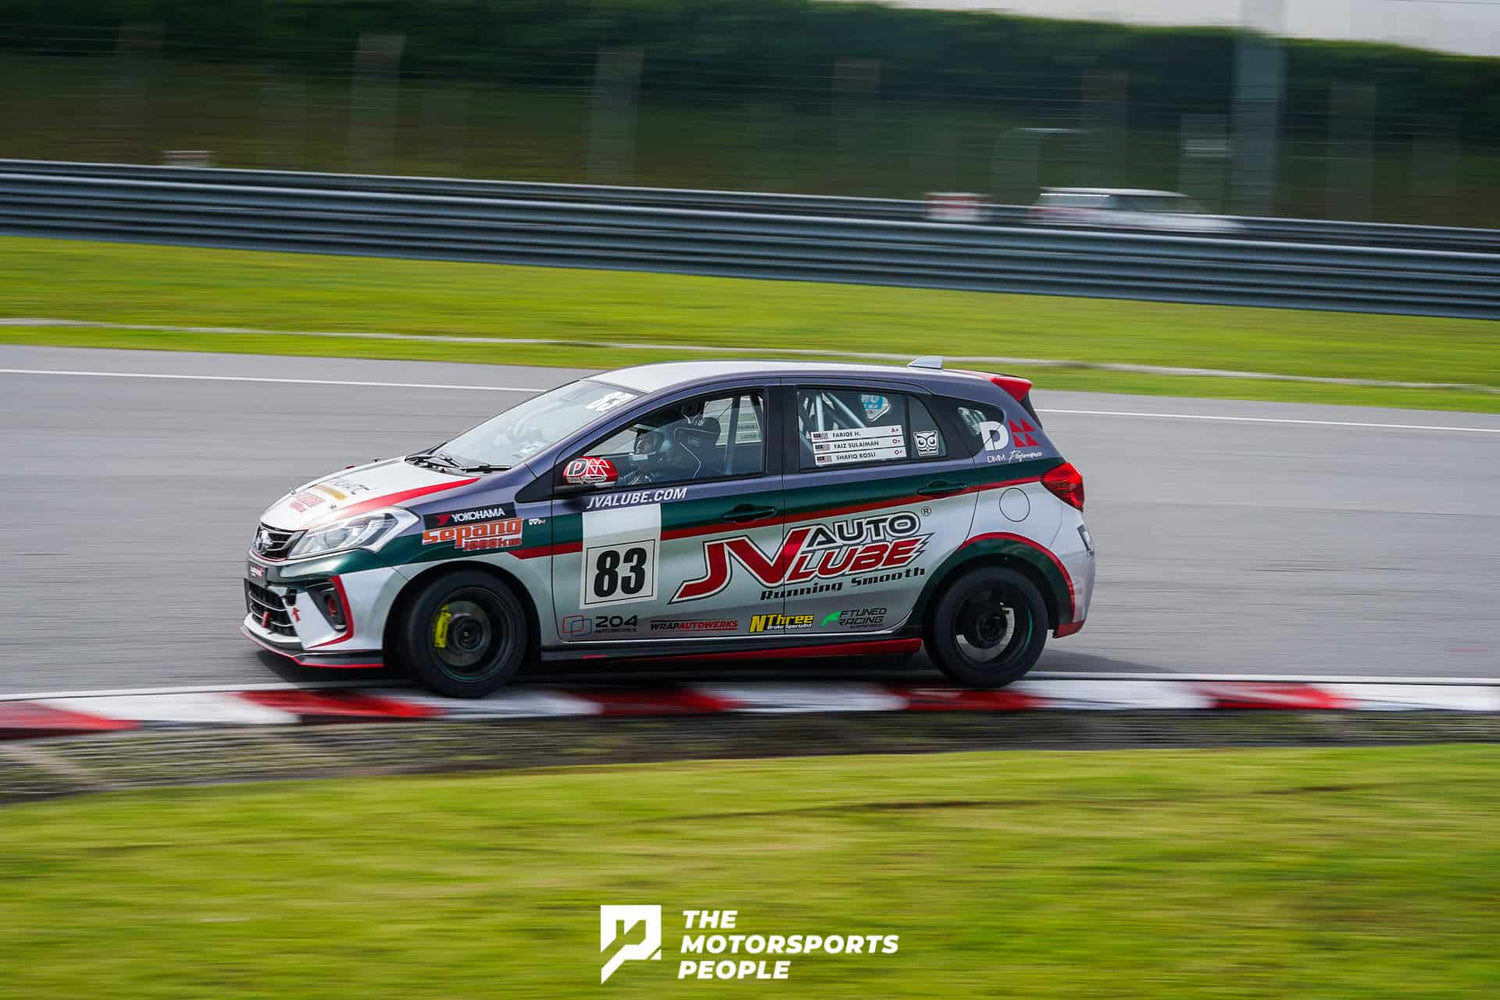 JV Motorsport’s #83 Perodua Myvi finishes P10 in class at Sepang 1000km!